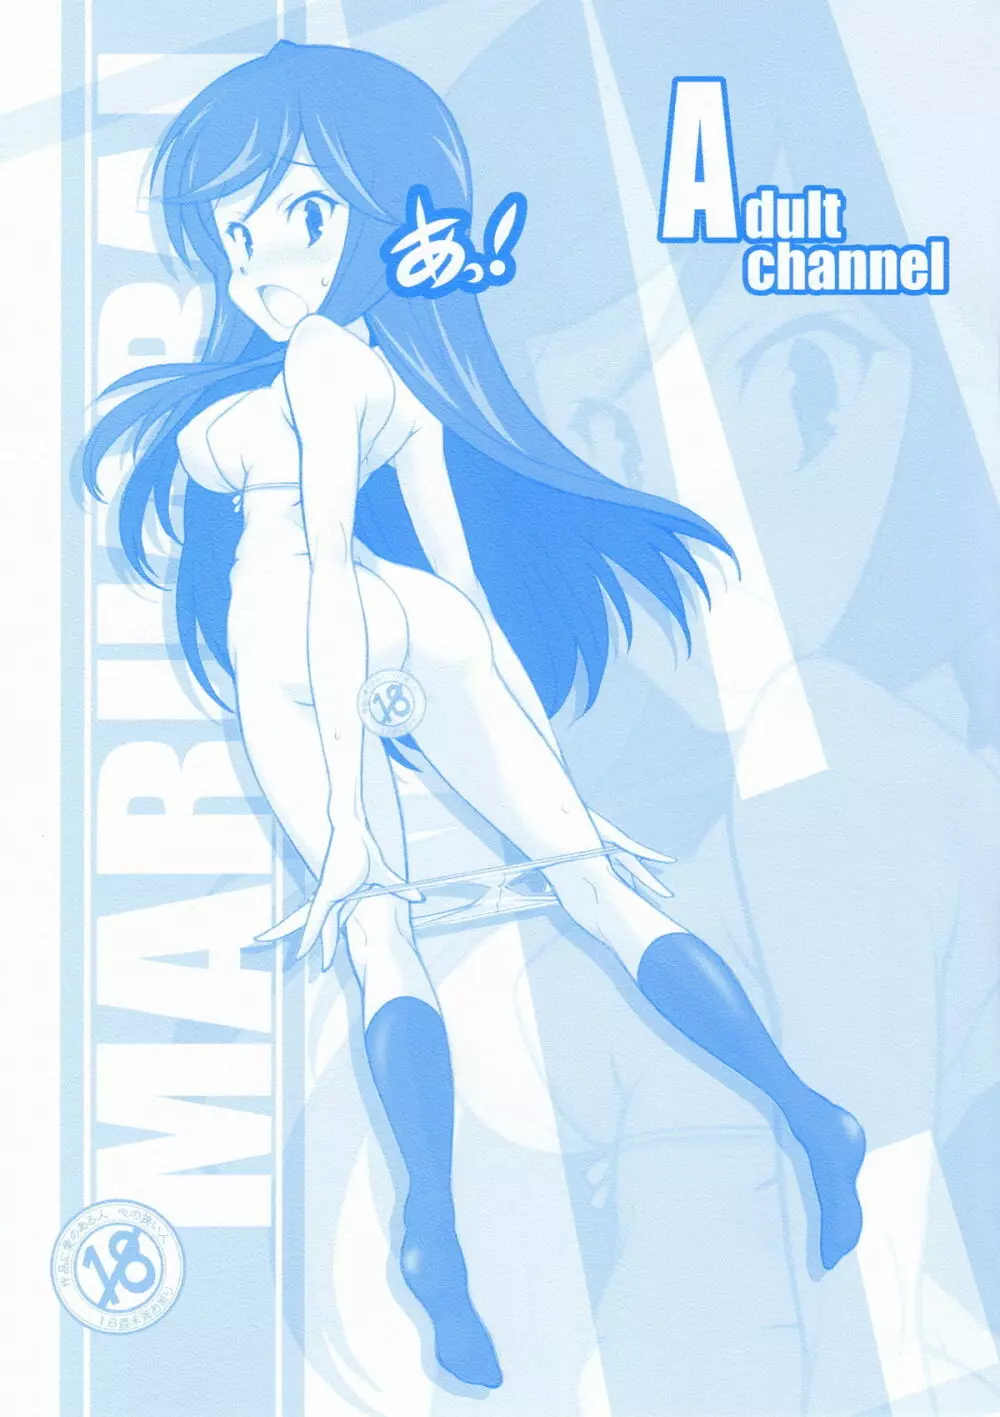 Adult channel Page.1